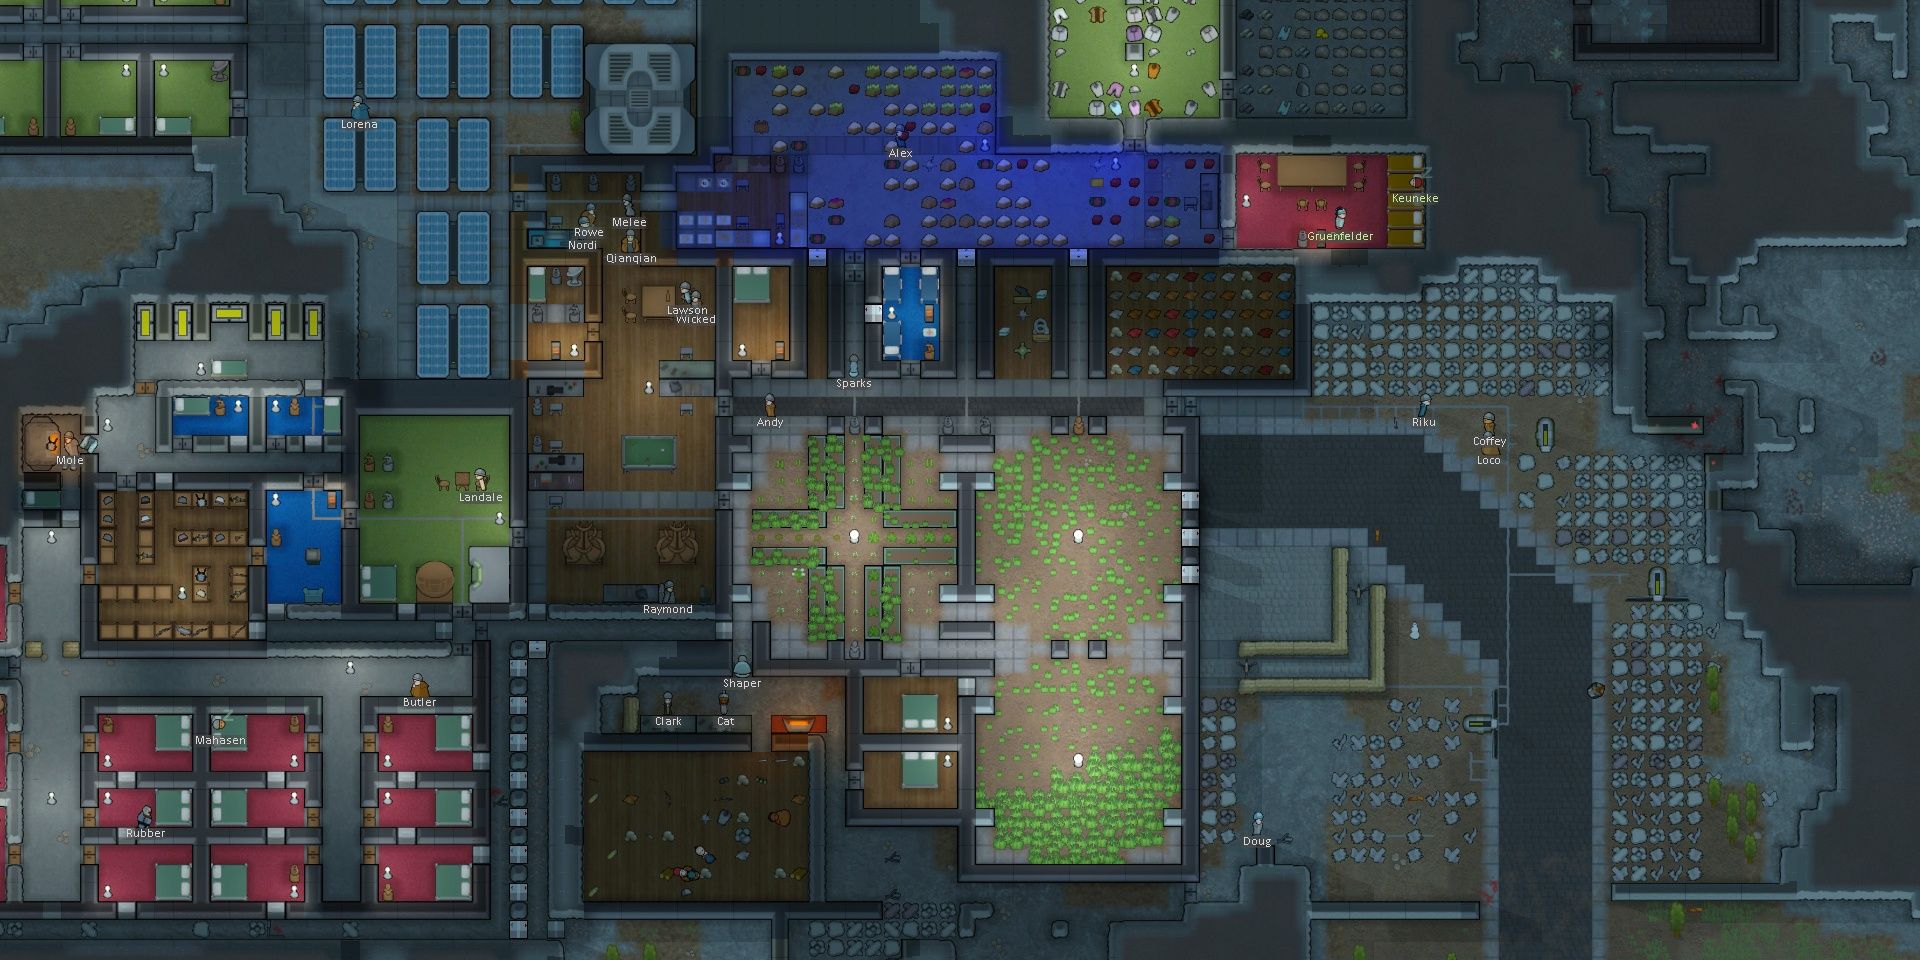 Colony with hospital bedrooms and solar panels